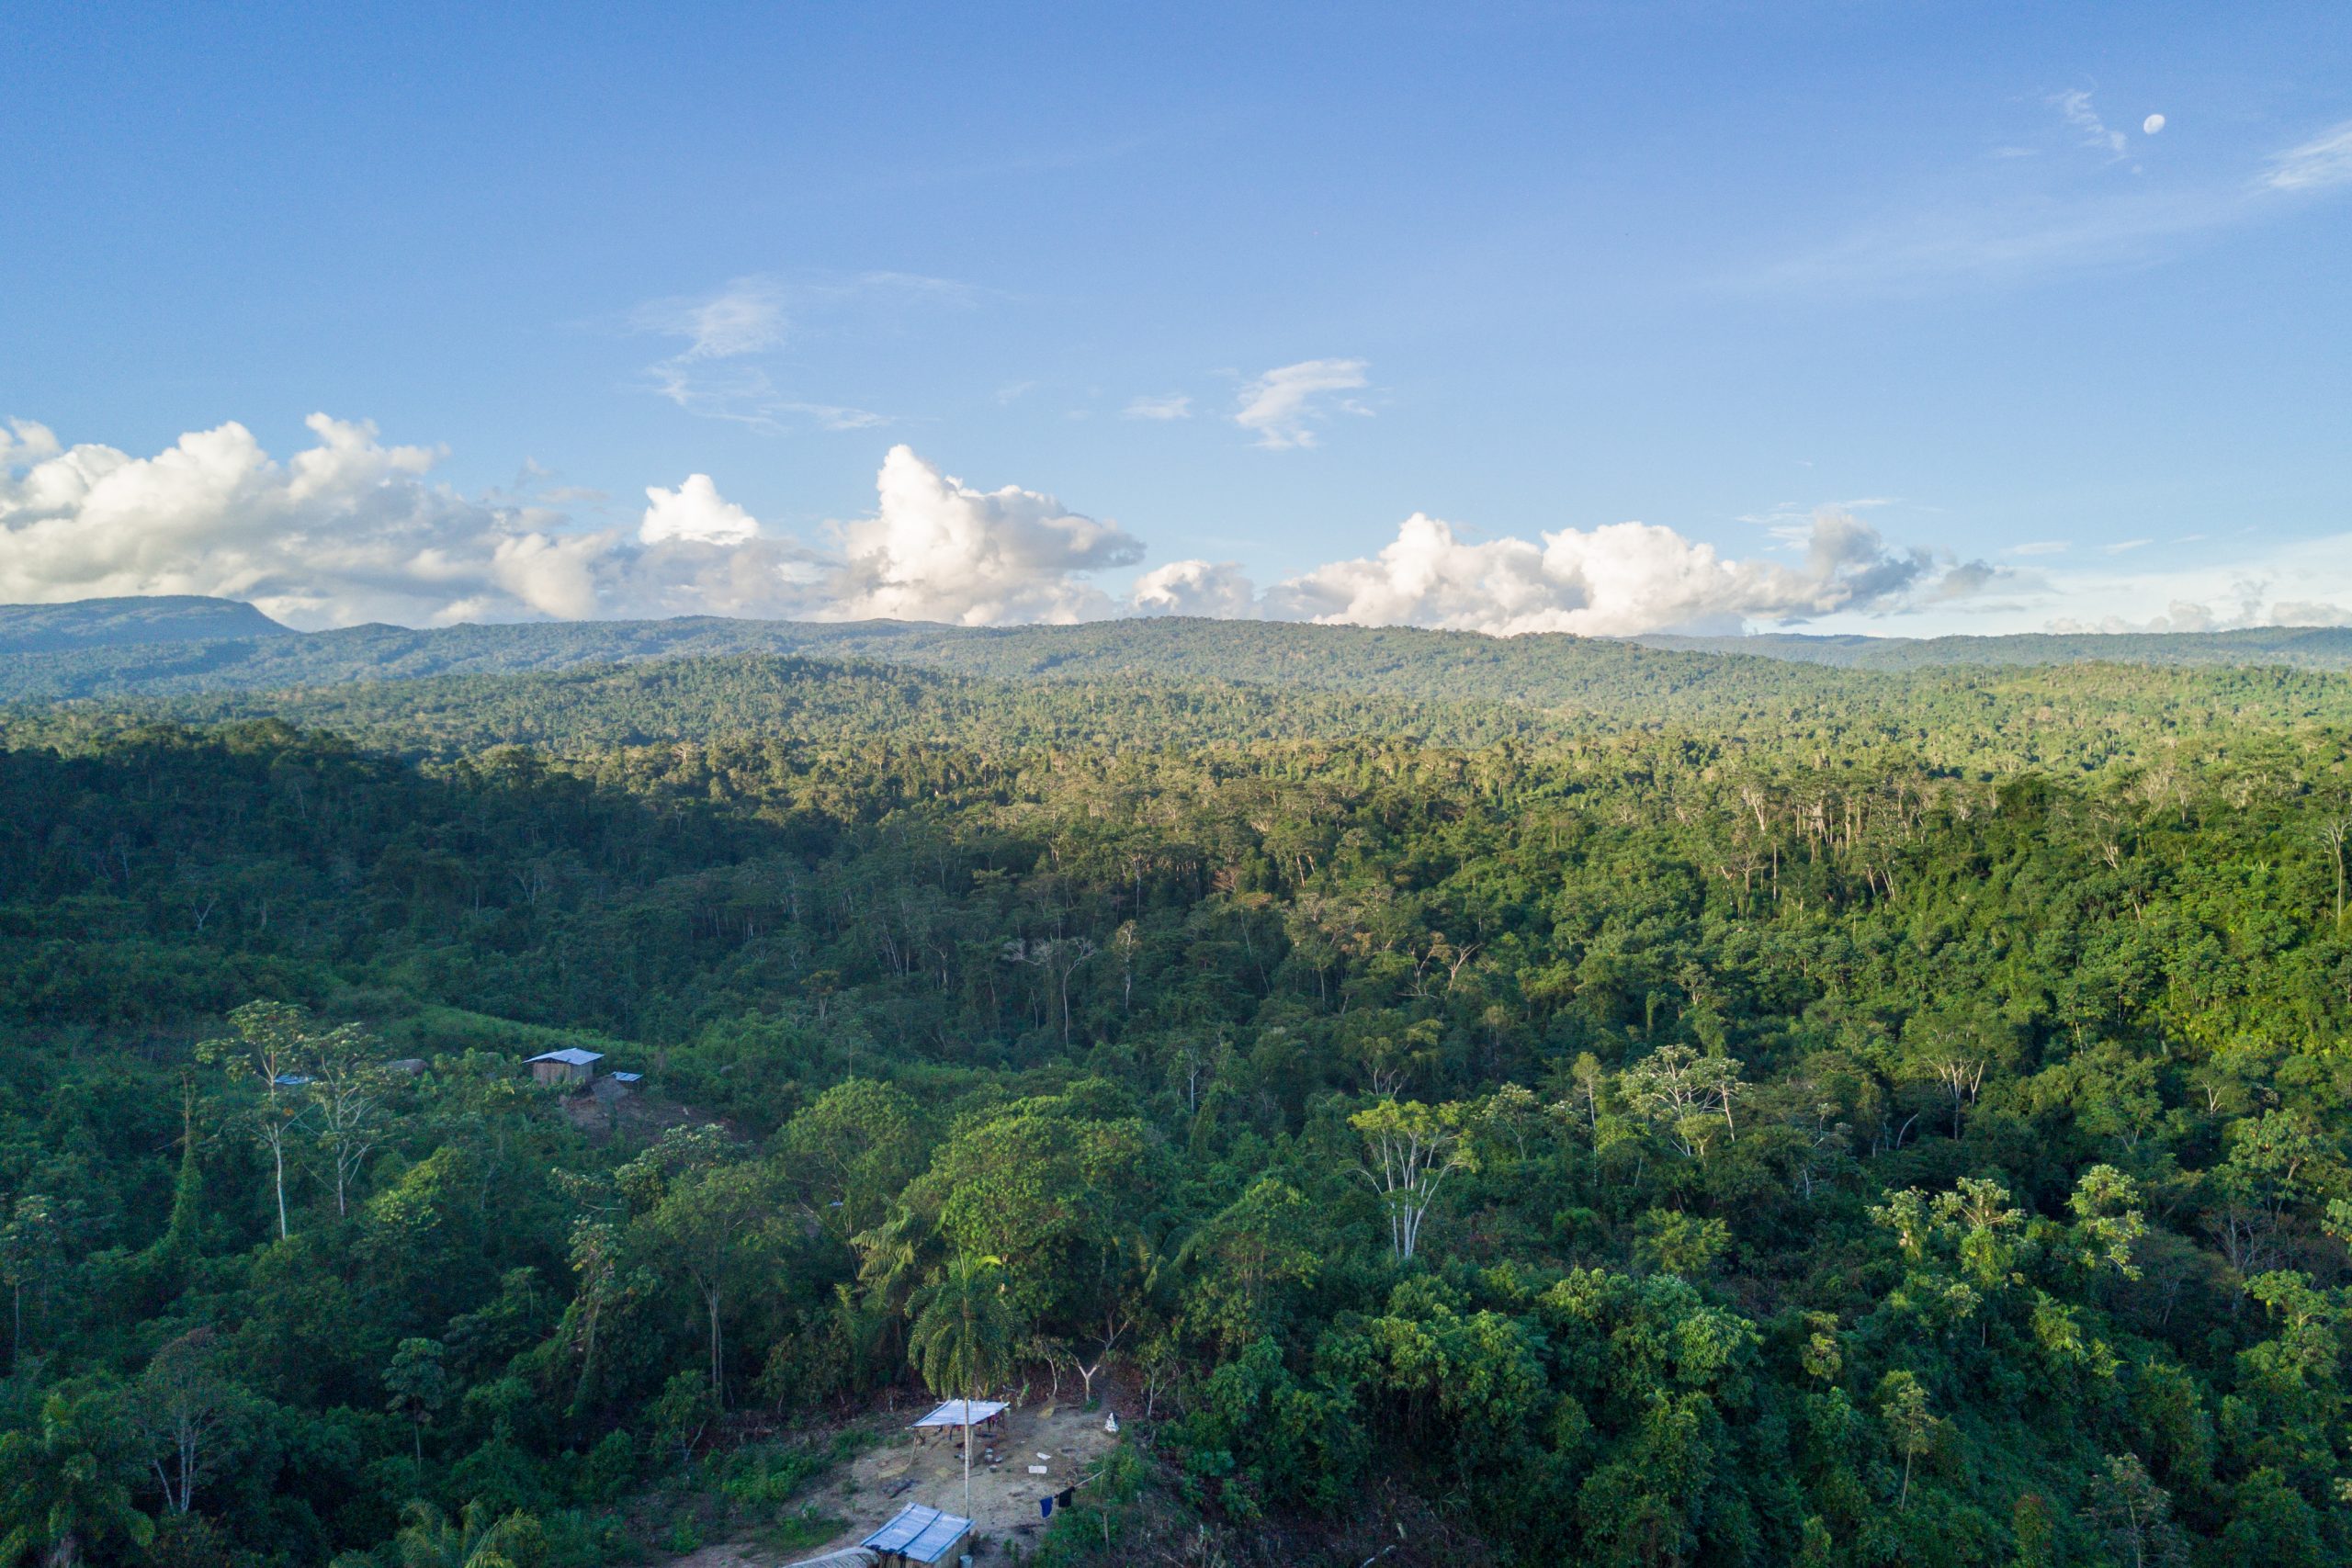 Aerial image of Amazon rainforest stretching to the horizon behind a small village.